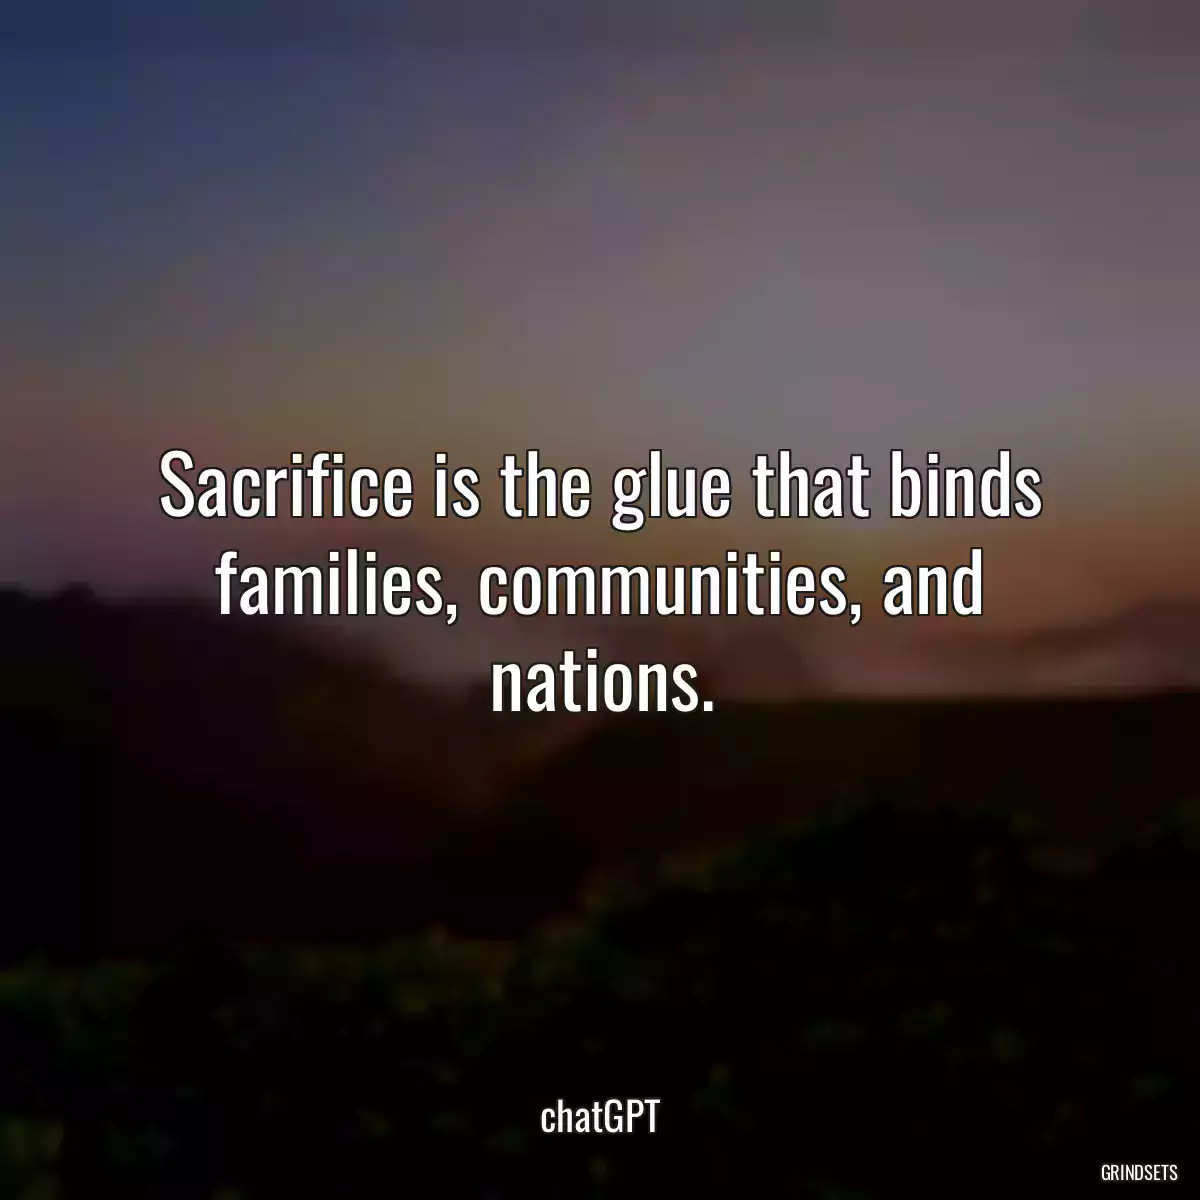 Sacrifice is the glue that binds families, communities, and nations.